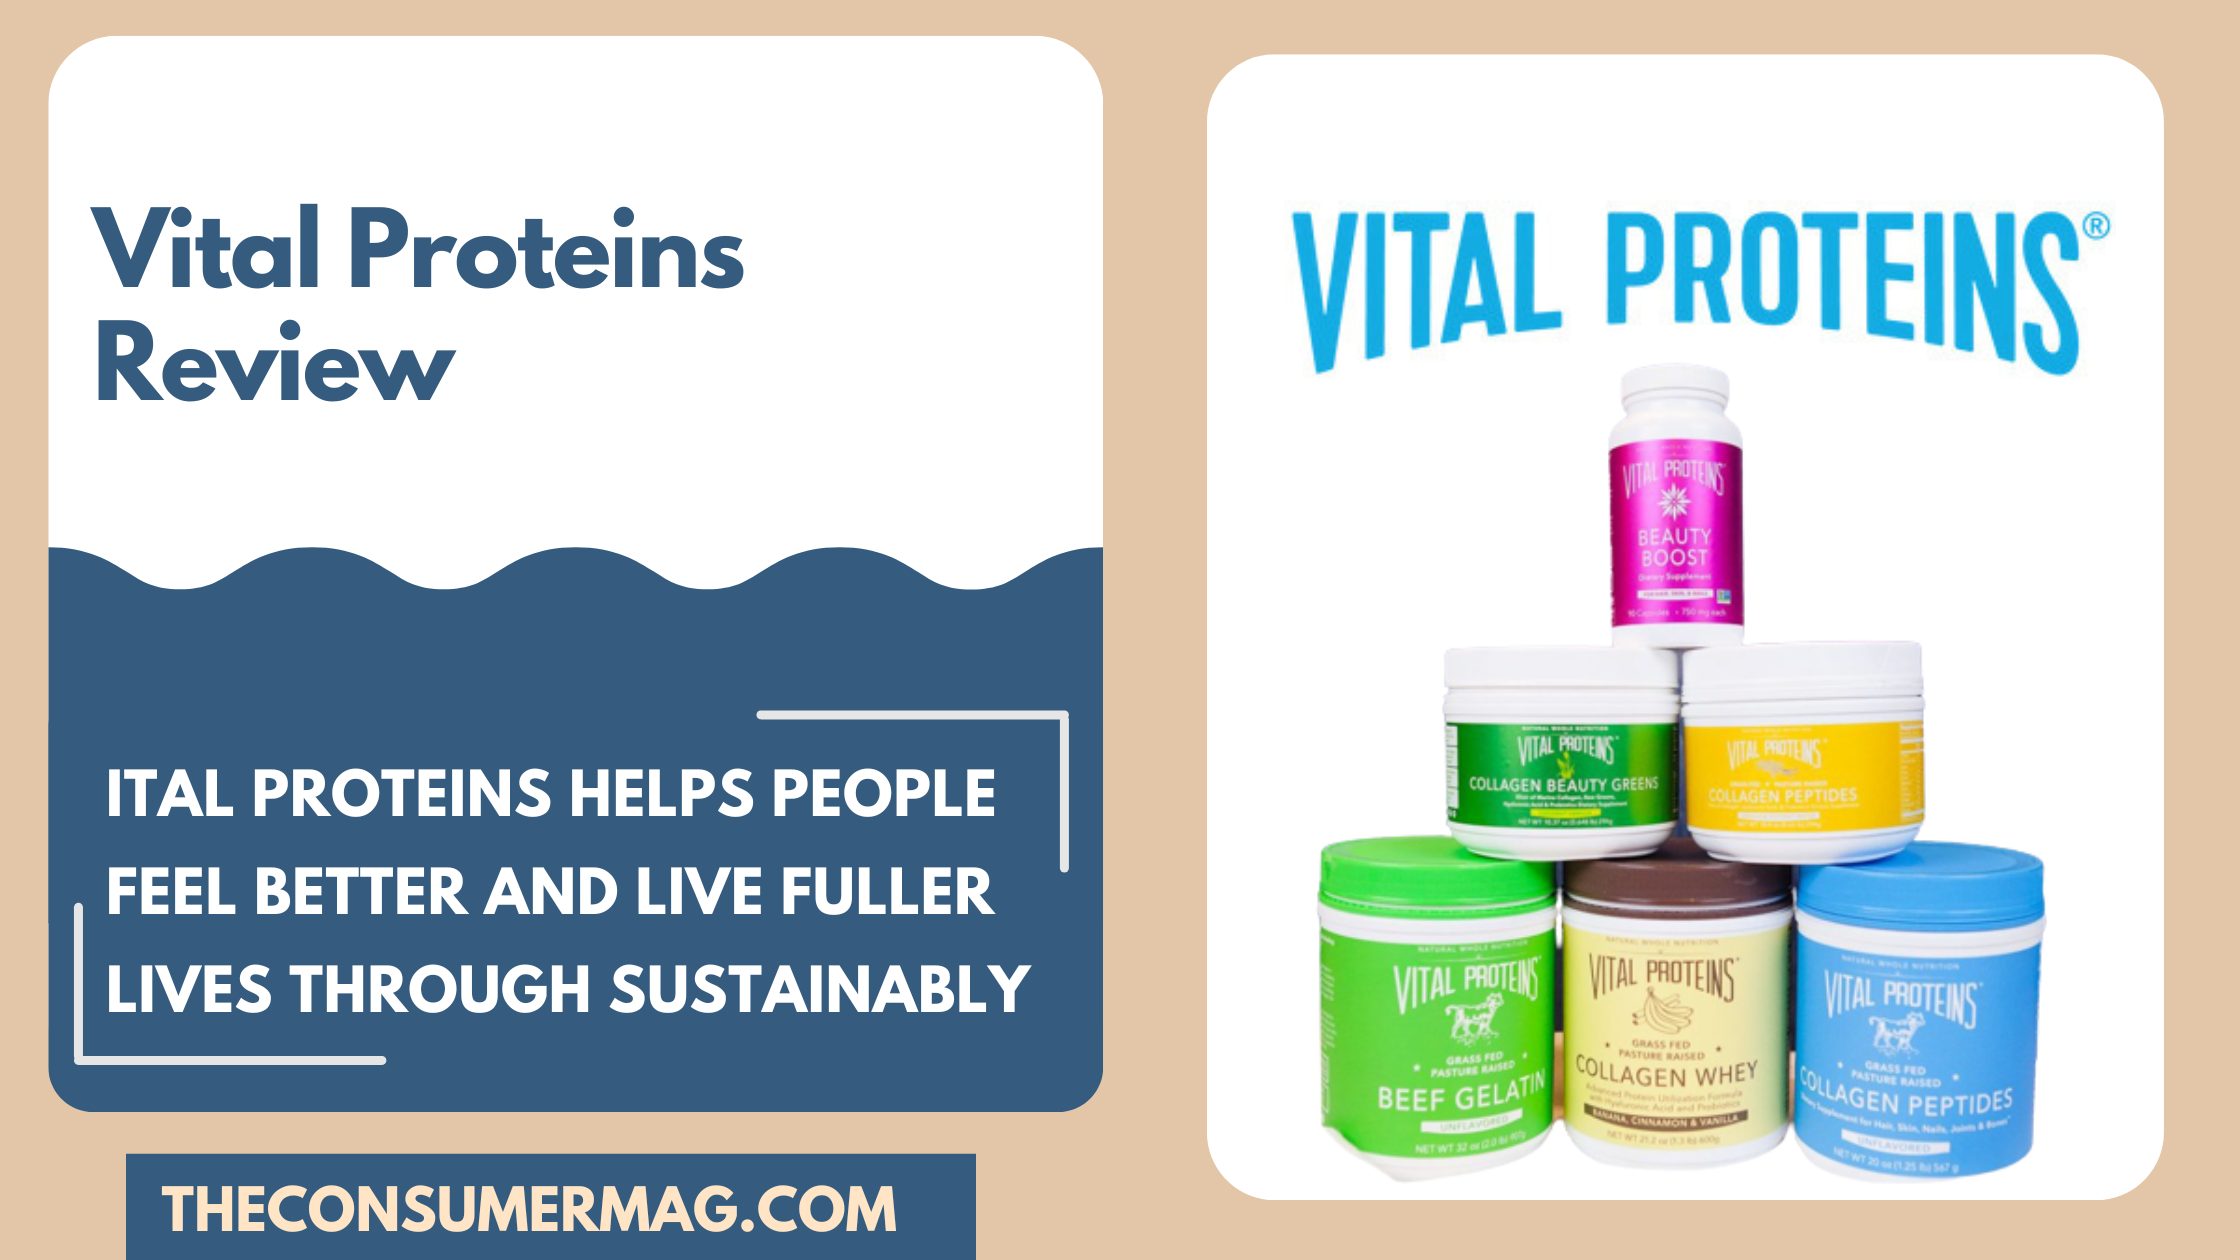 Vital Proteins featured image